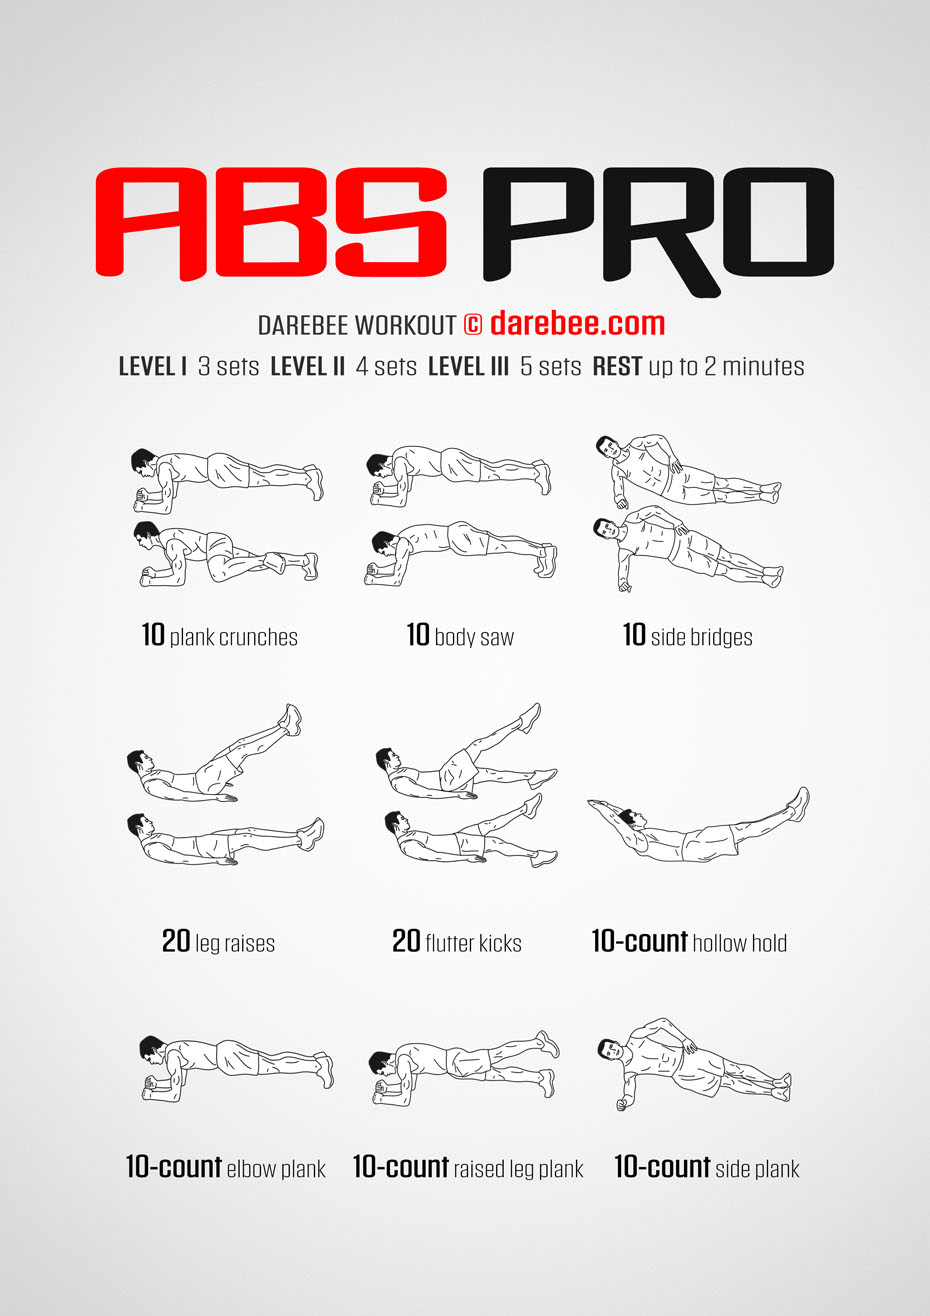 15 Minute Abs Workout Gym Male for Burn Fat fast